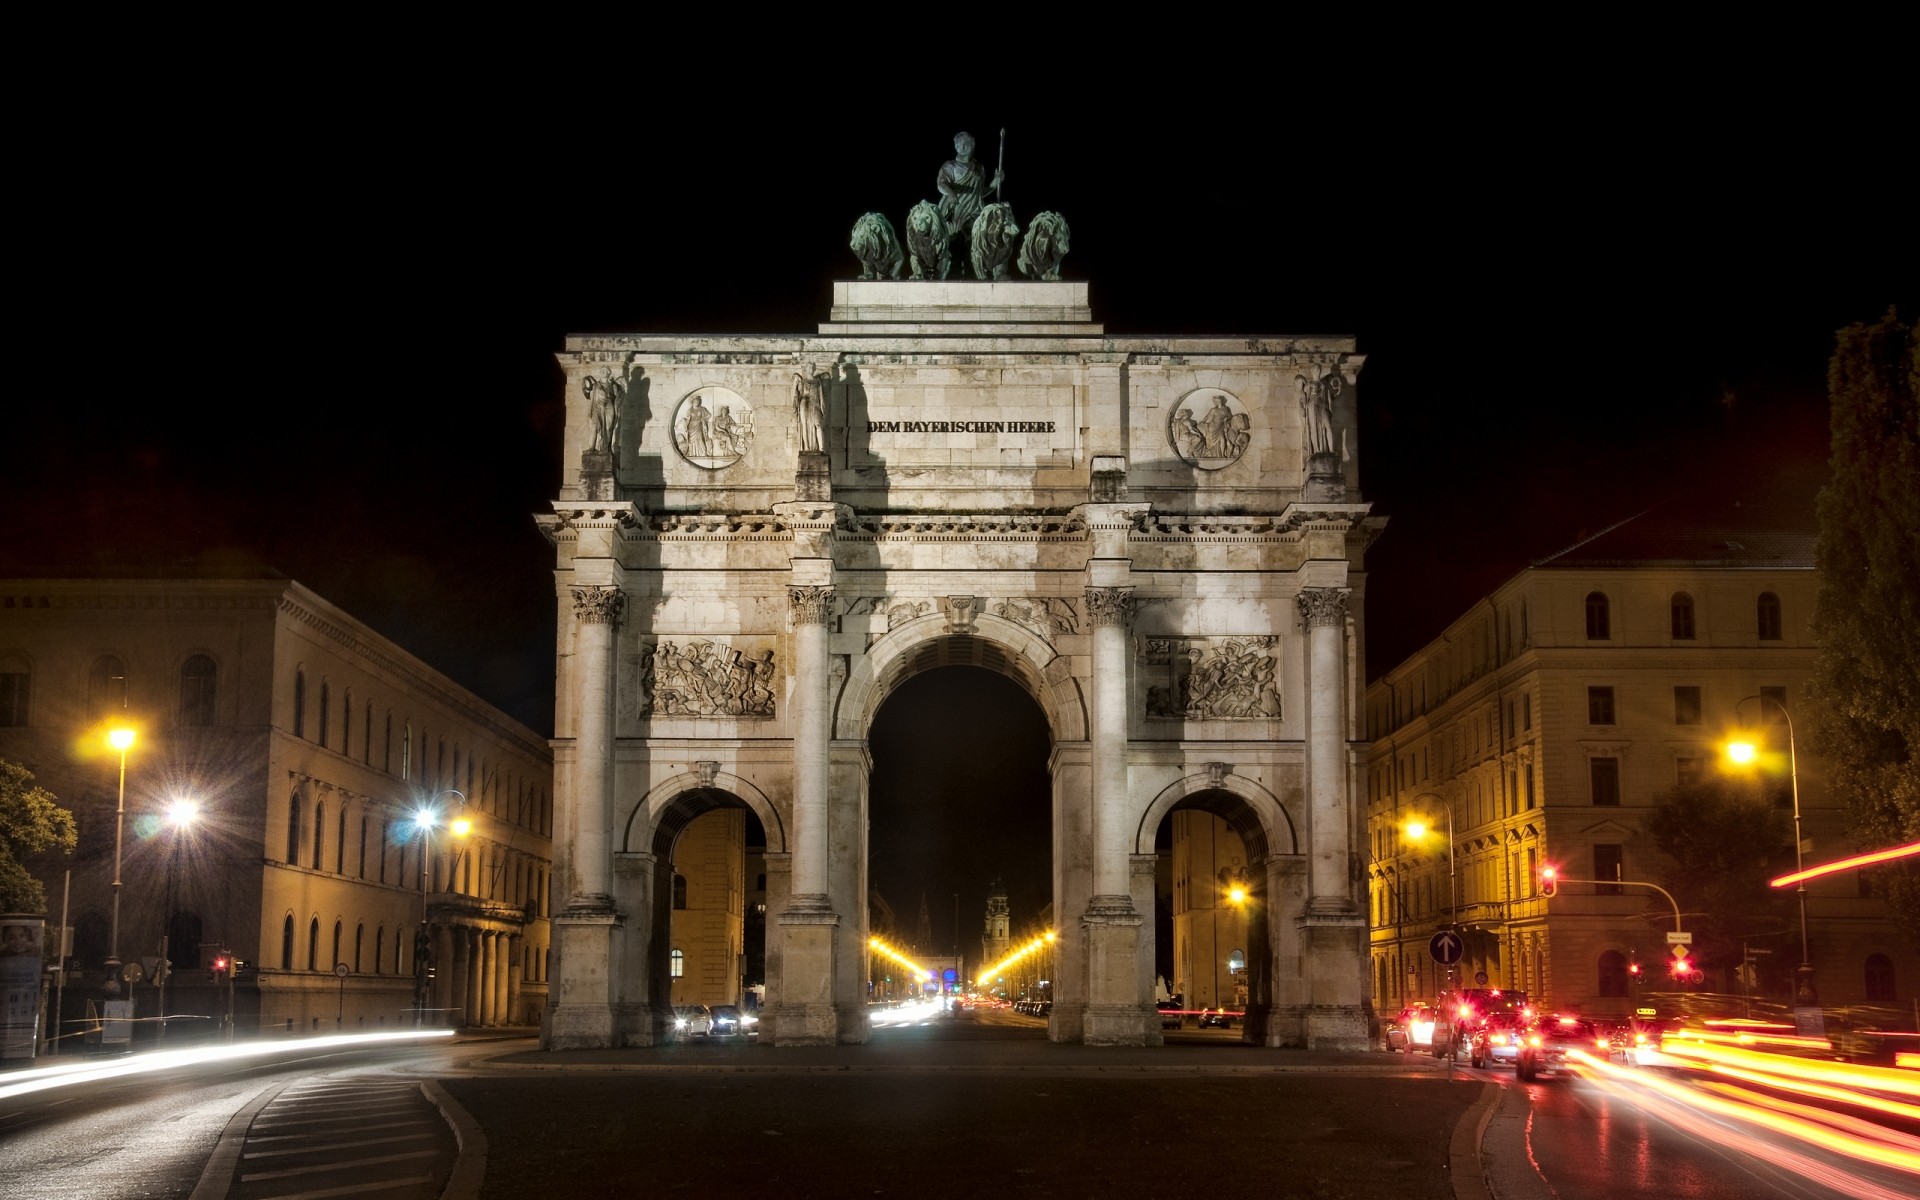 germany architecture travel city building illuminated evening street dusk road monument light outdoors arch urban tourism landmark sky three arched triumphal night